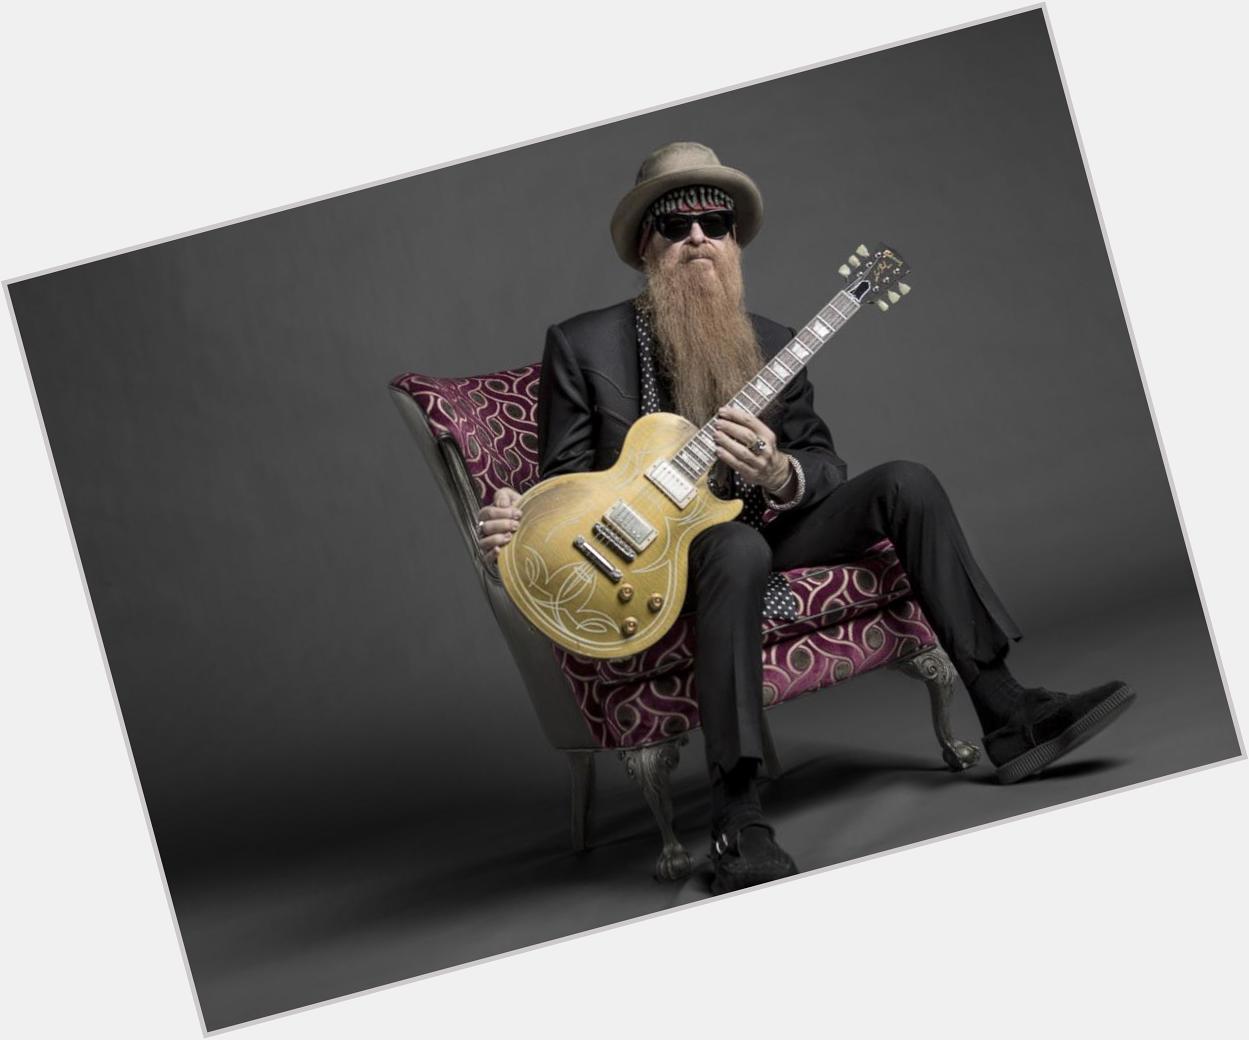 Happy birthday to a true rock & roll bad ass, Billy Gibbons of 